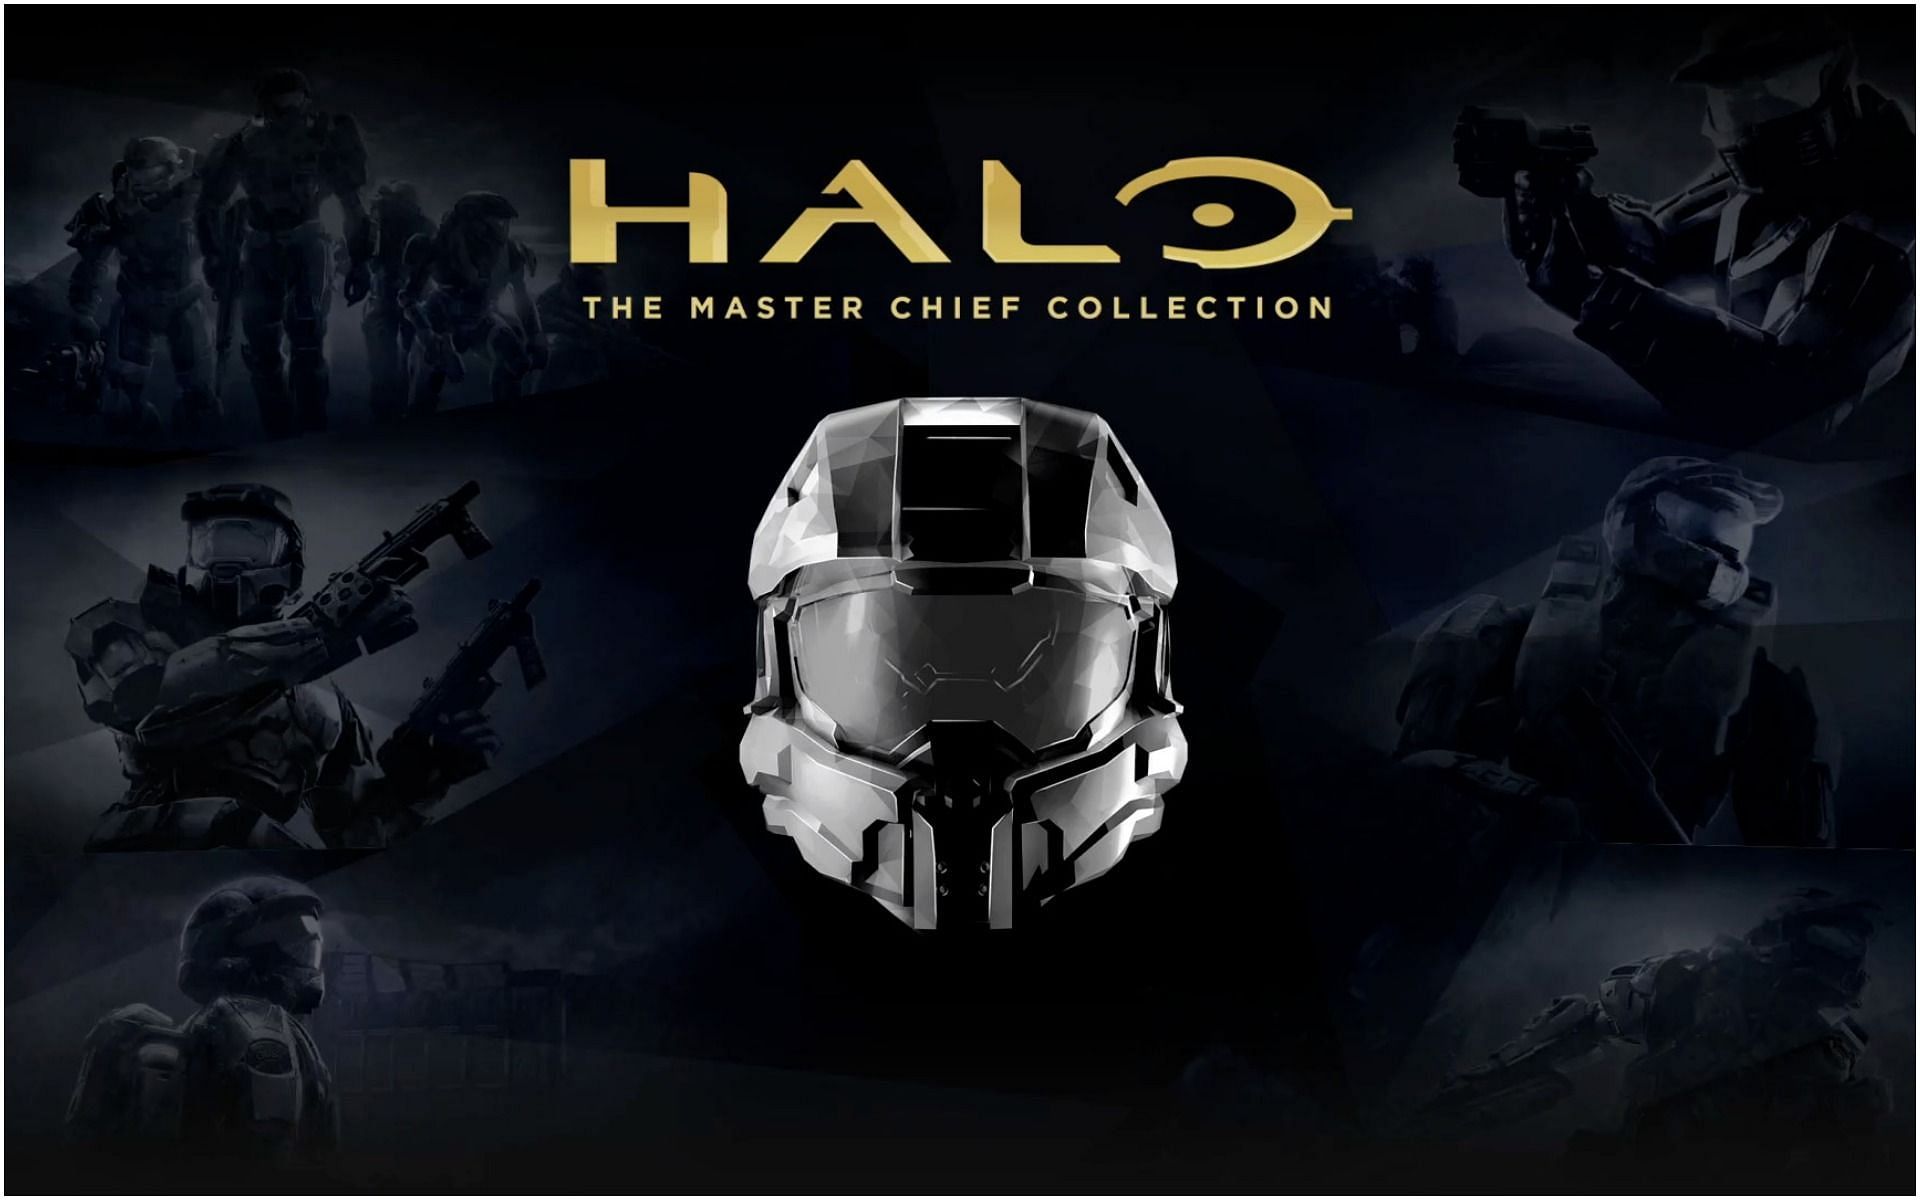 Halo master chief русификаторы. Halo мастер Чиф collection. Halo Master Chief collection обложка. Halo: коллекция мастер Чифа. Halo 2 Master Chief collection.